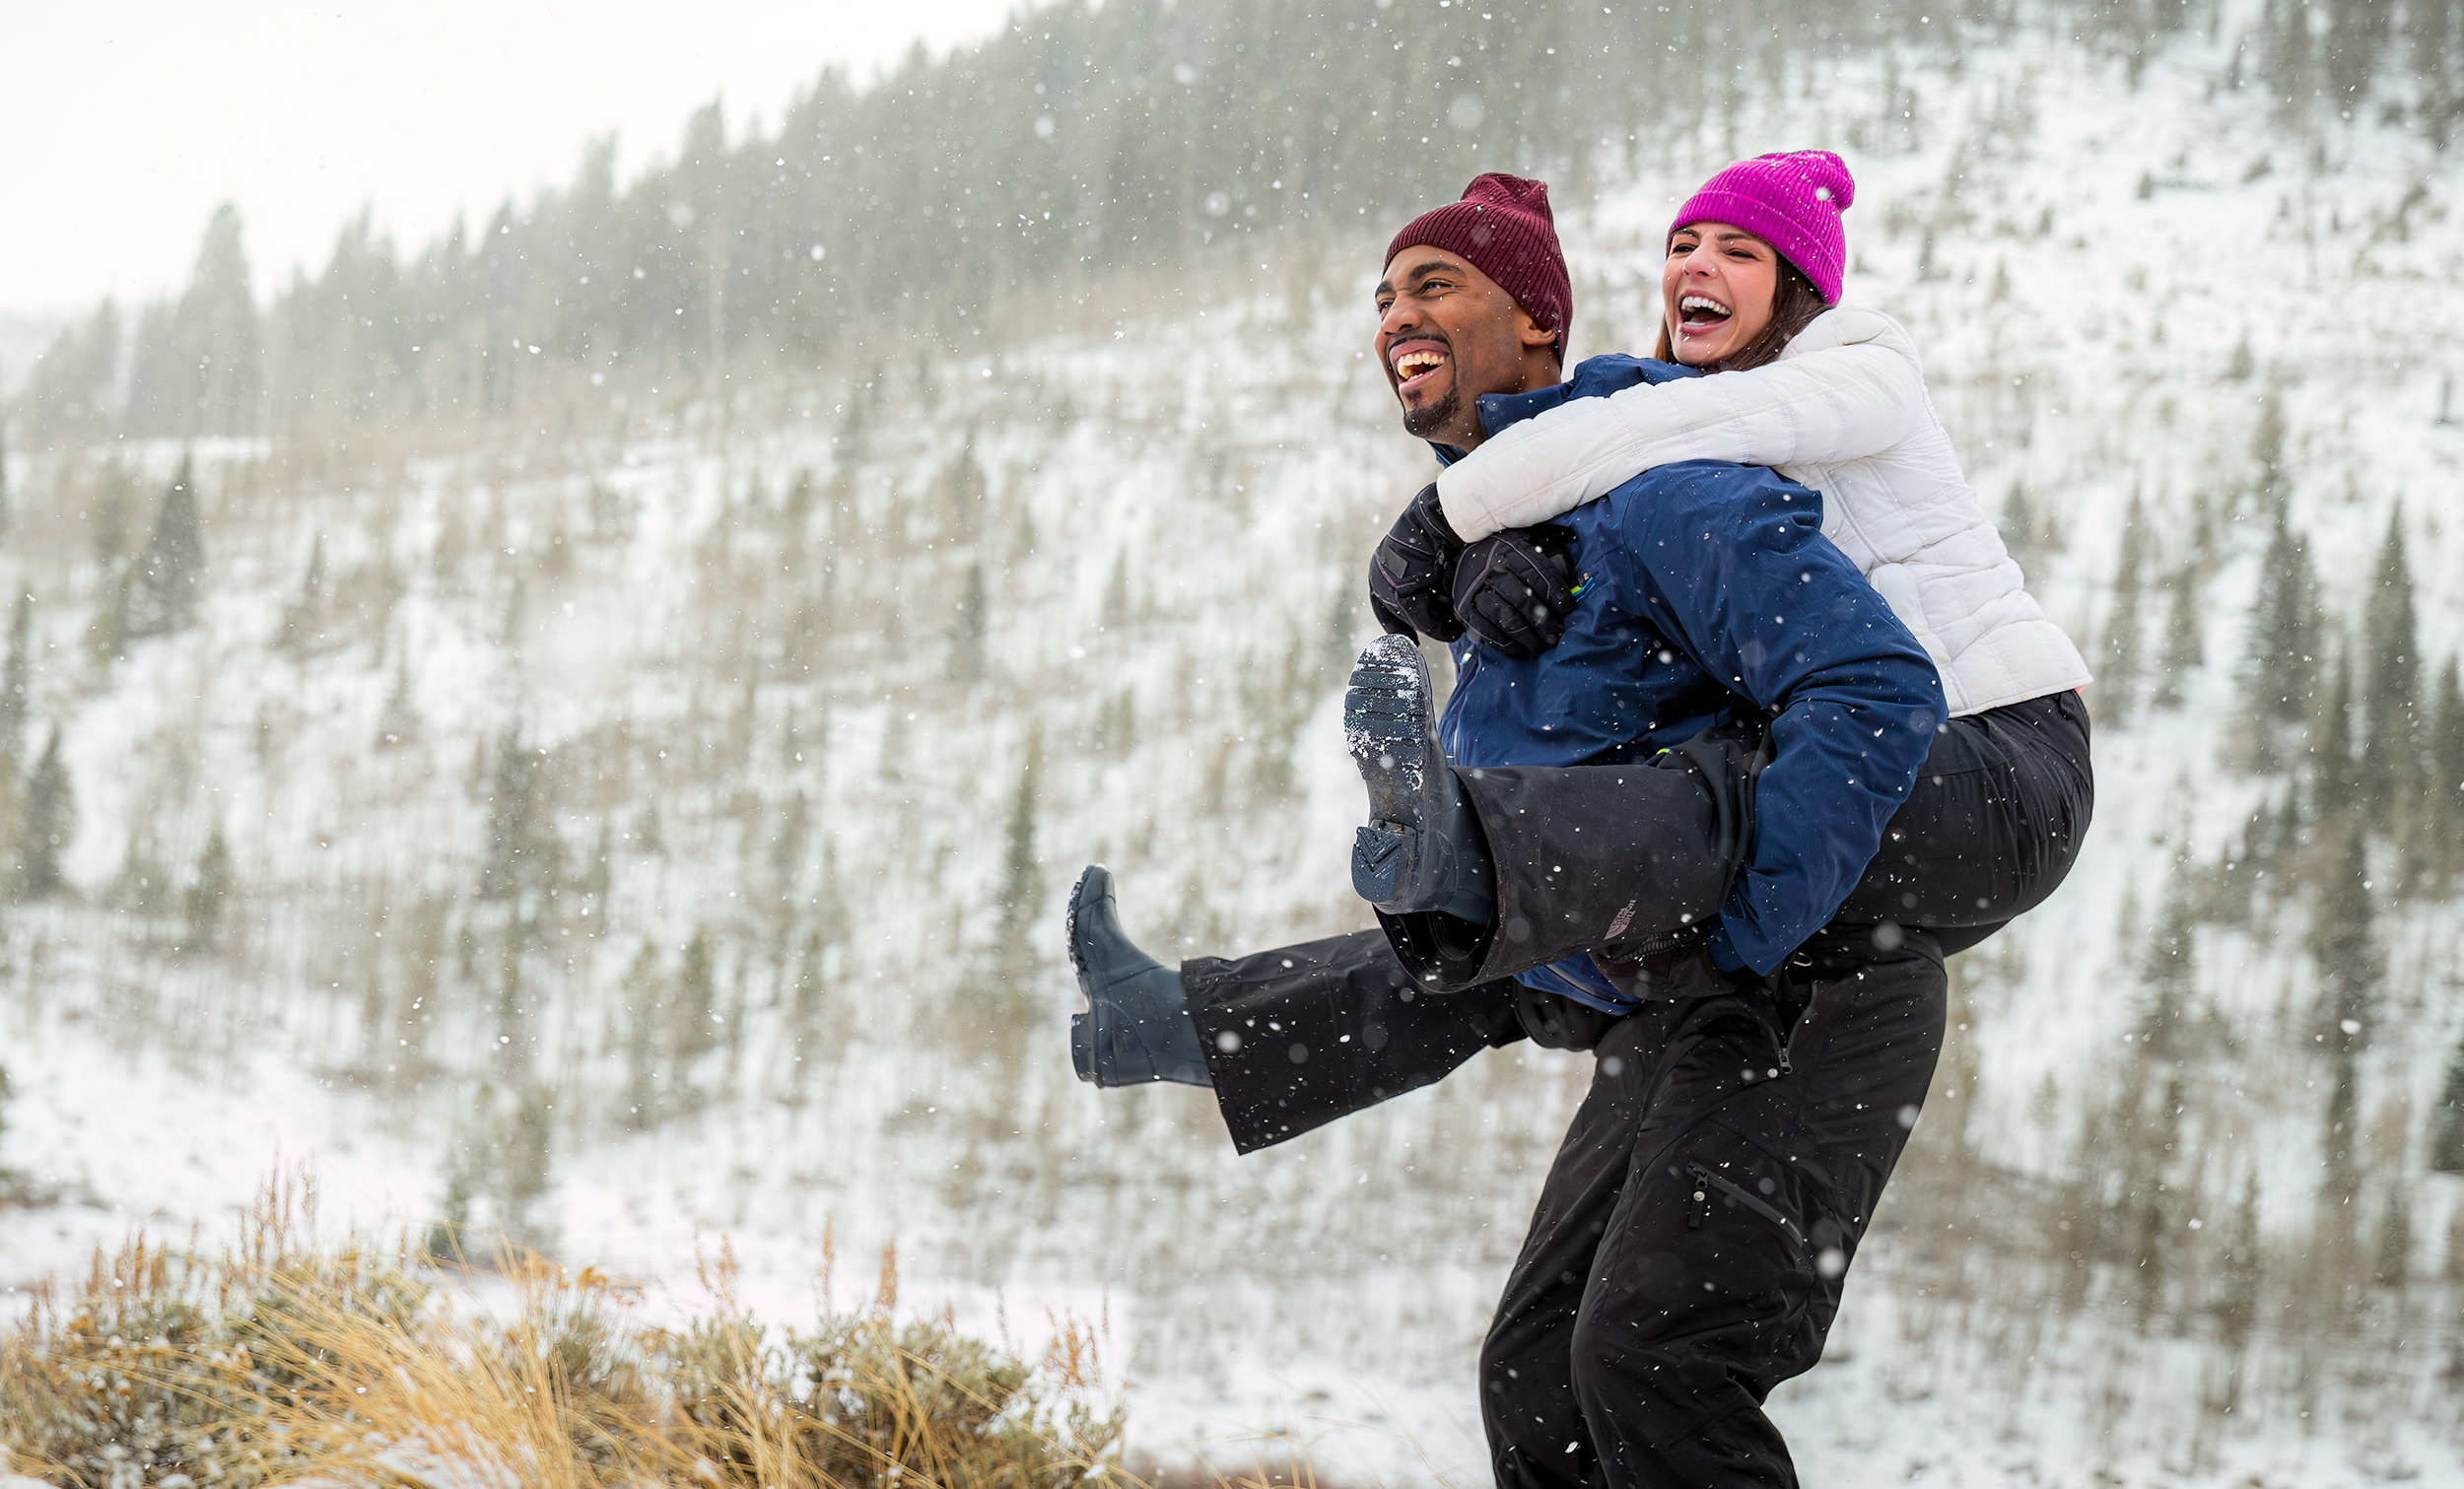 Lifestyle photography of a couple playing in snow for The Travel Channel